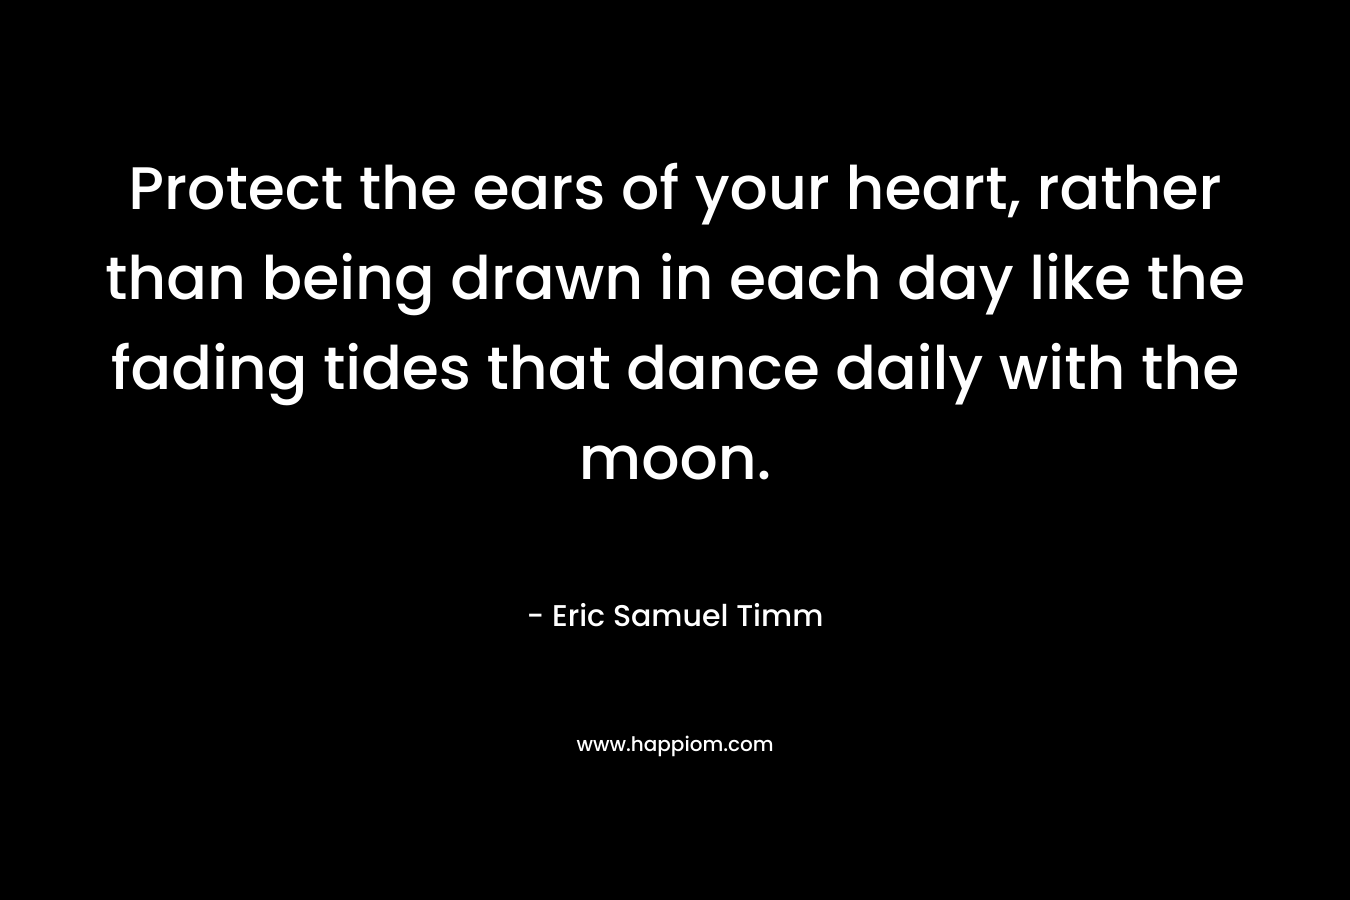 Protect the ears of your heart, rather than being drawn in each day like the fading tides that dance daily with the moon.